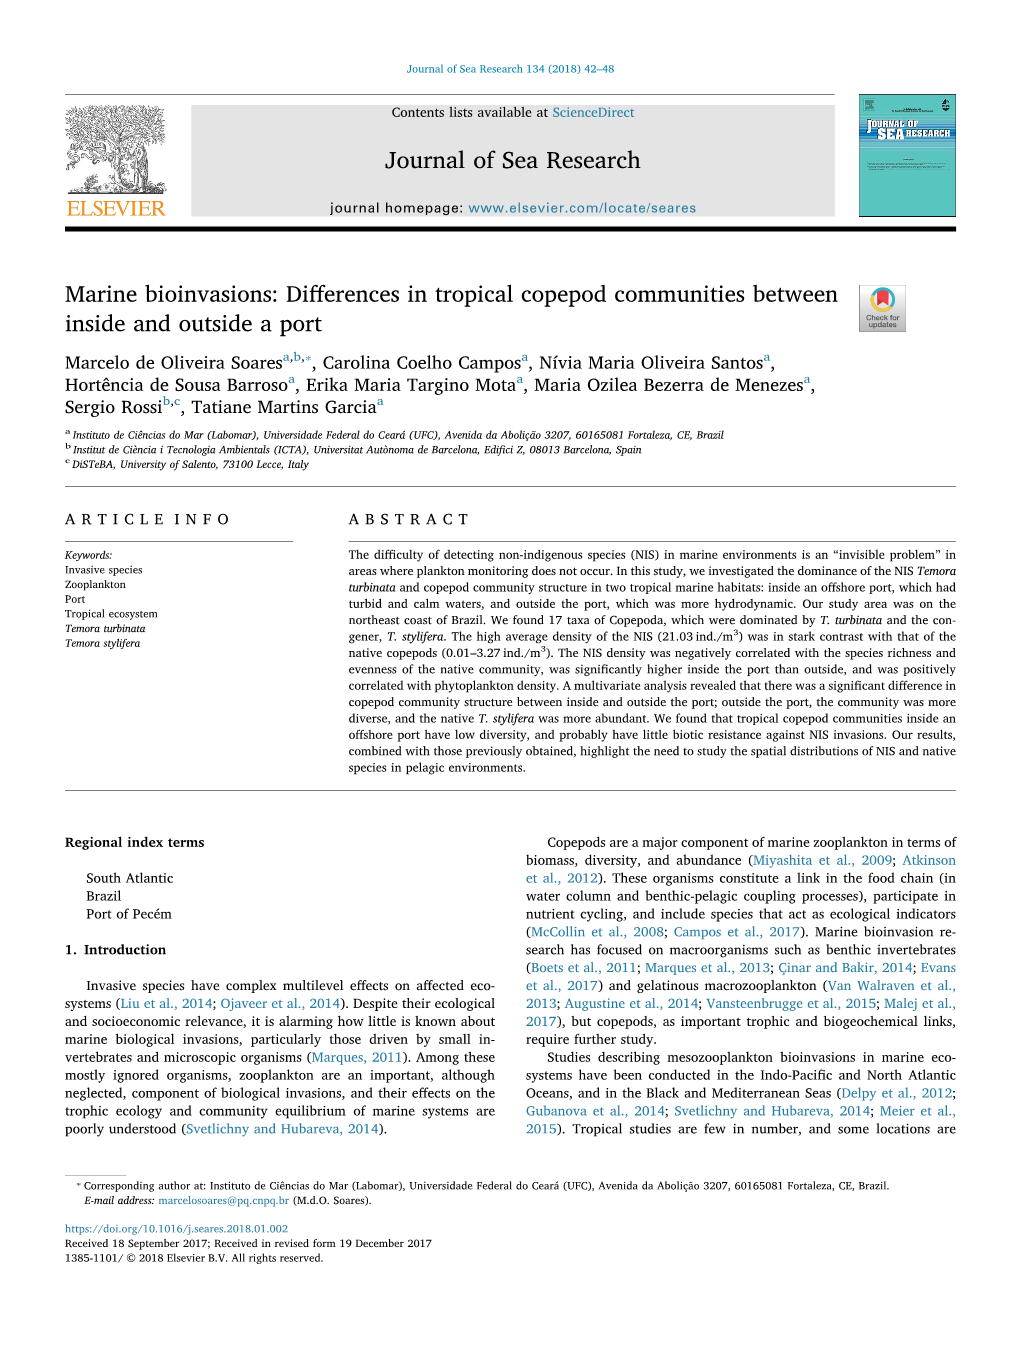 Marine Bioinvasions: Differences in Tropical Copepod Communities